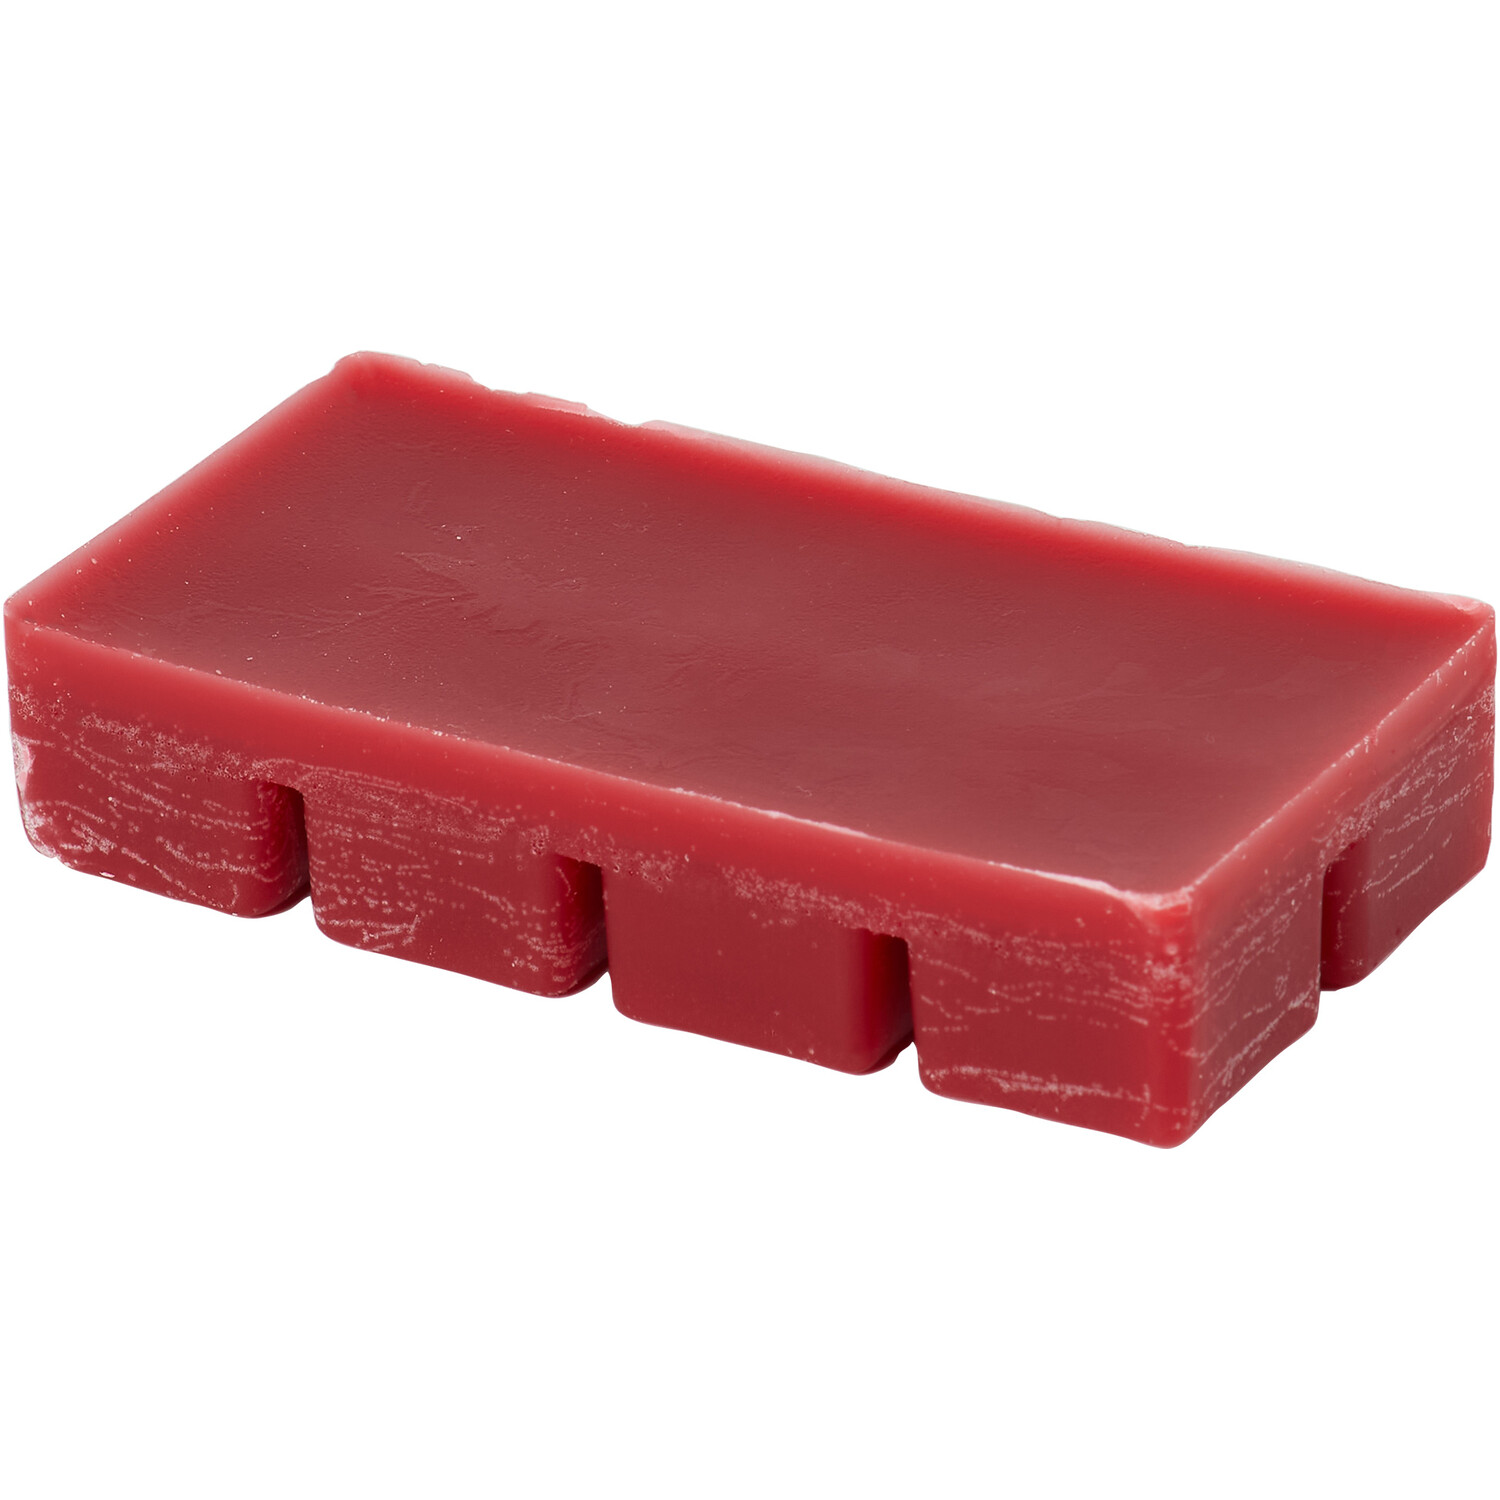 Assorted True Aroma Wax Melts - Red Image 4